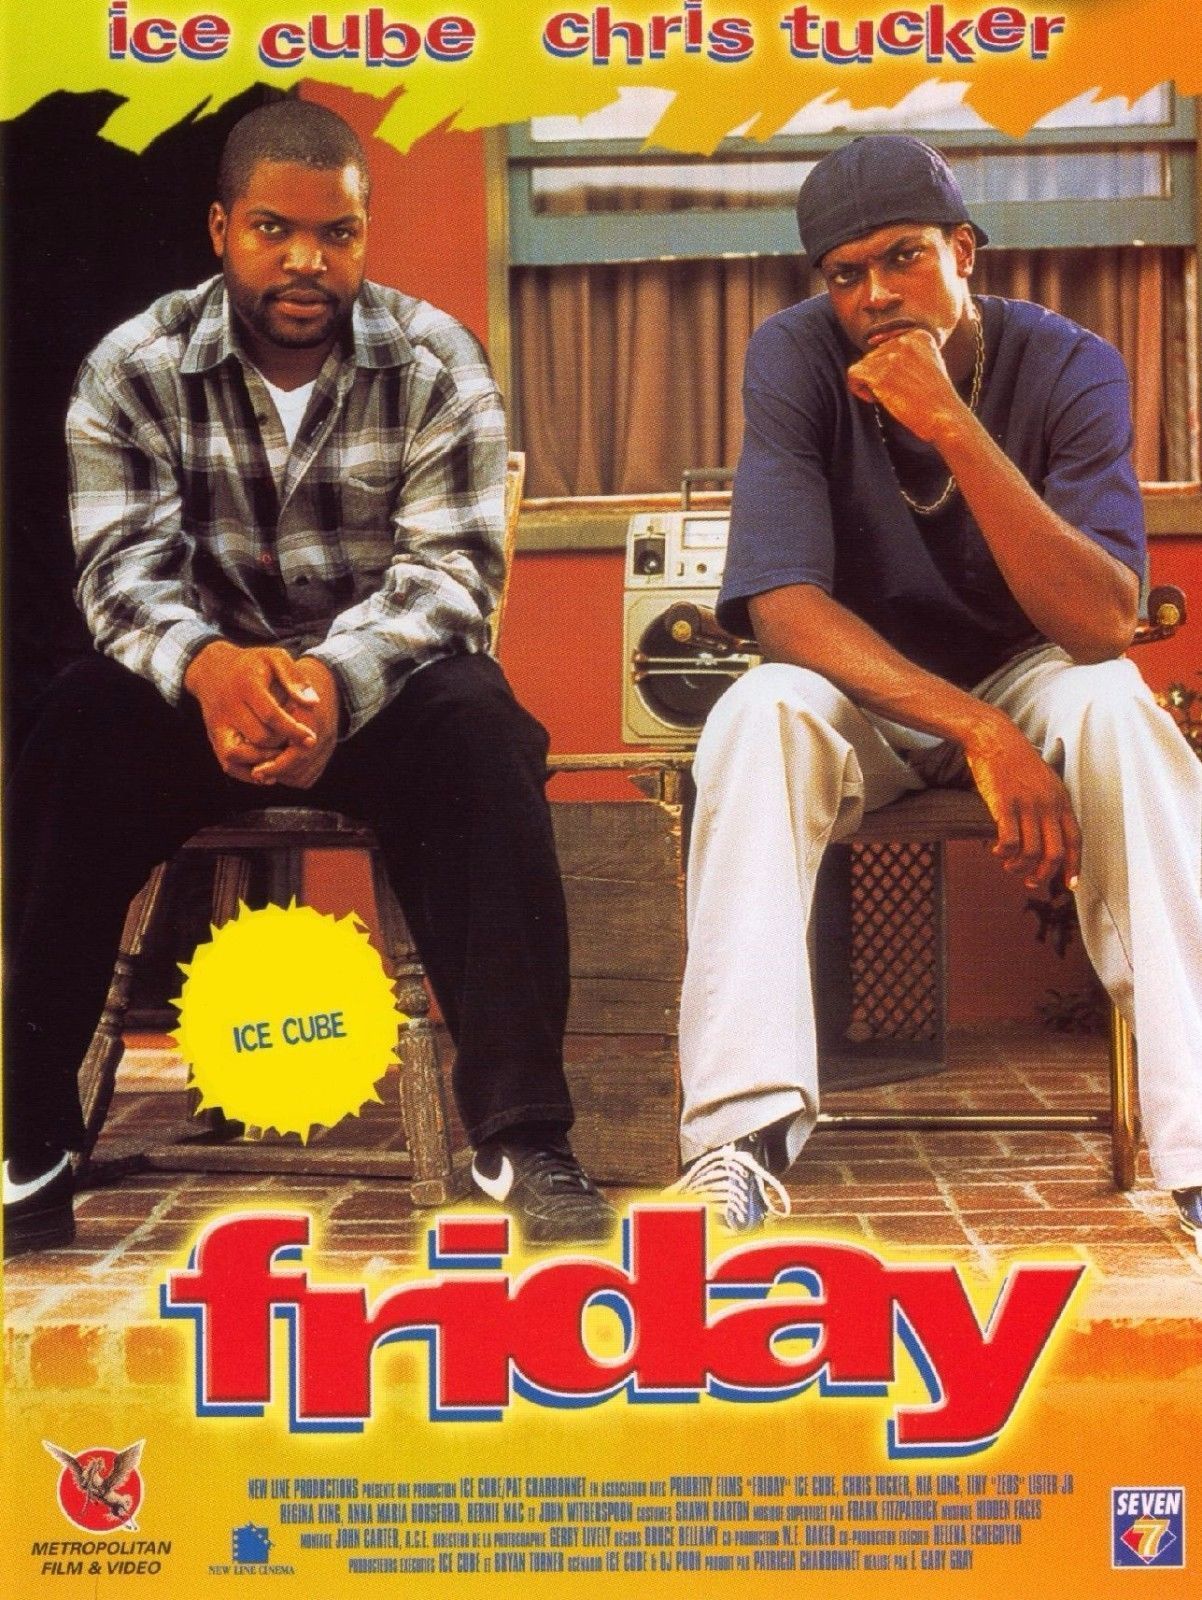 FRIDAY Movie Poster 24 x 36 ICE CUBE CHRIS TUCKER Posters & Prints